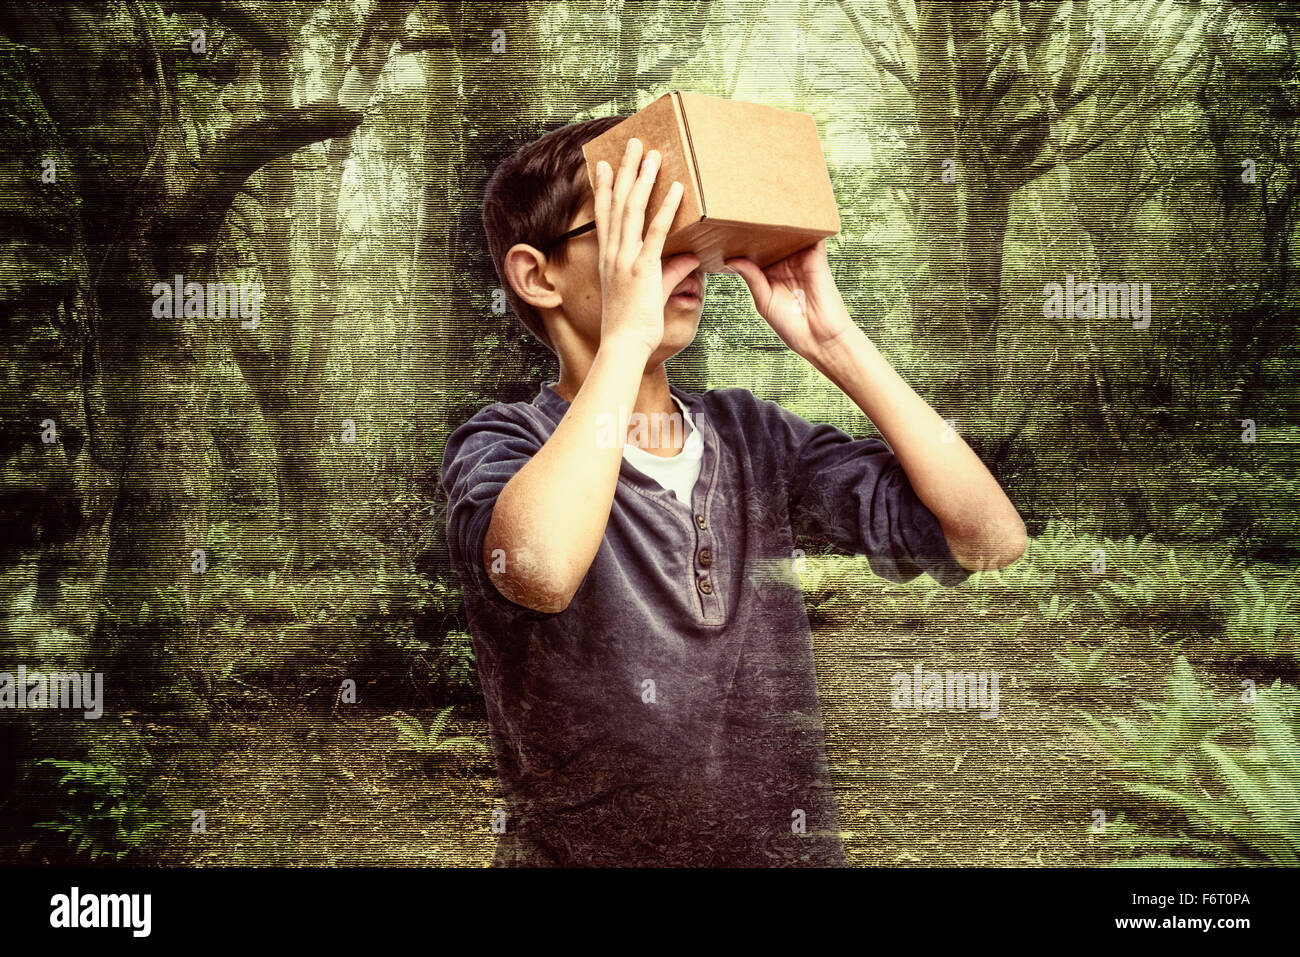 Mixed race boy peering in box in forest Stock Photo